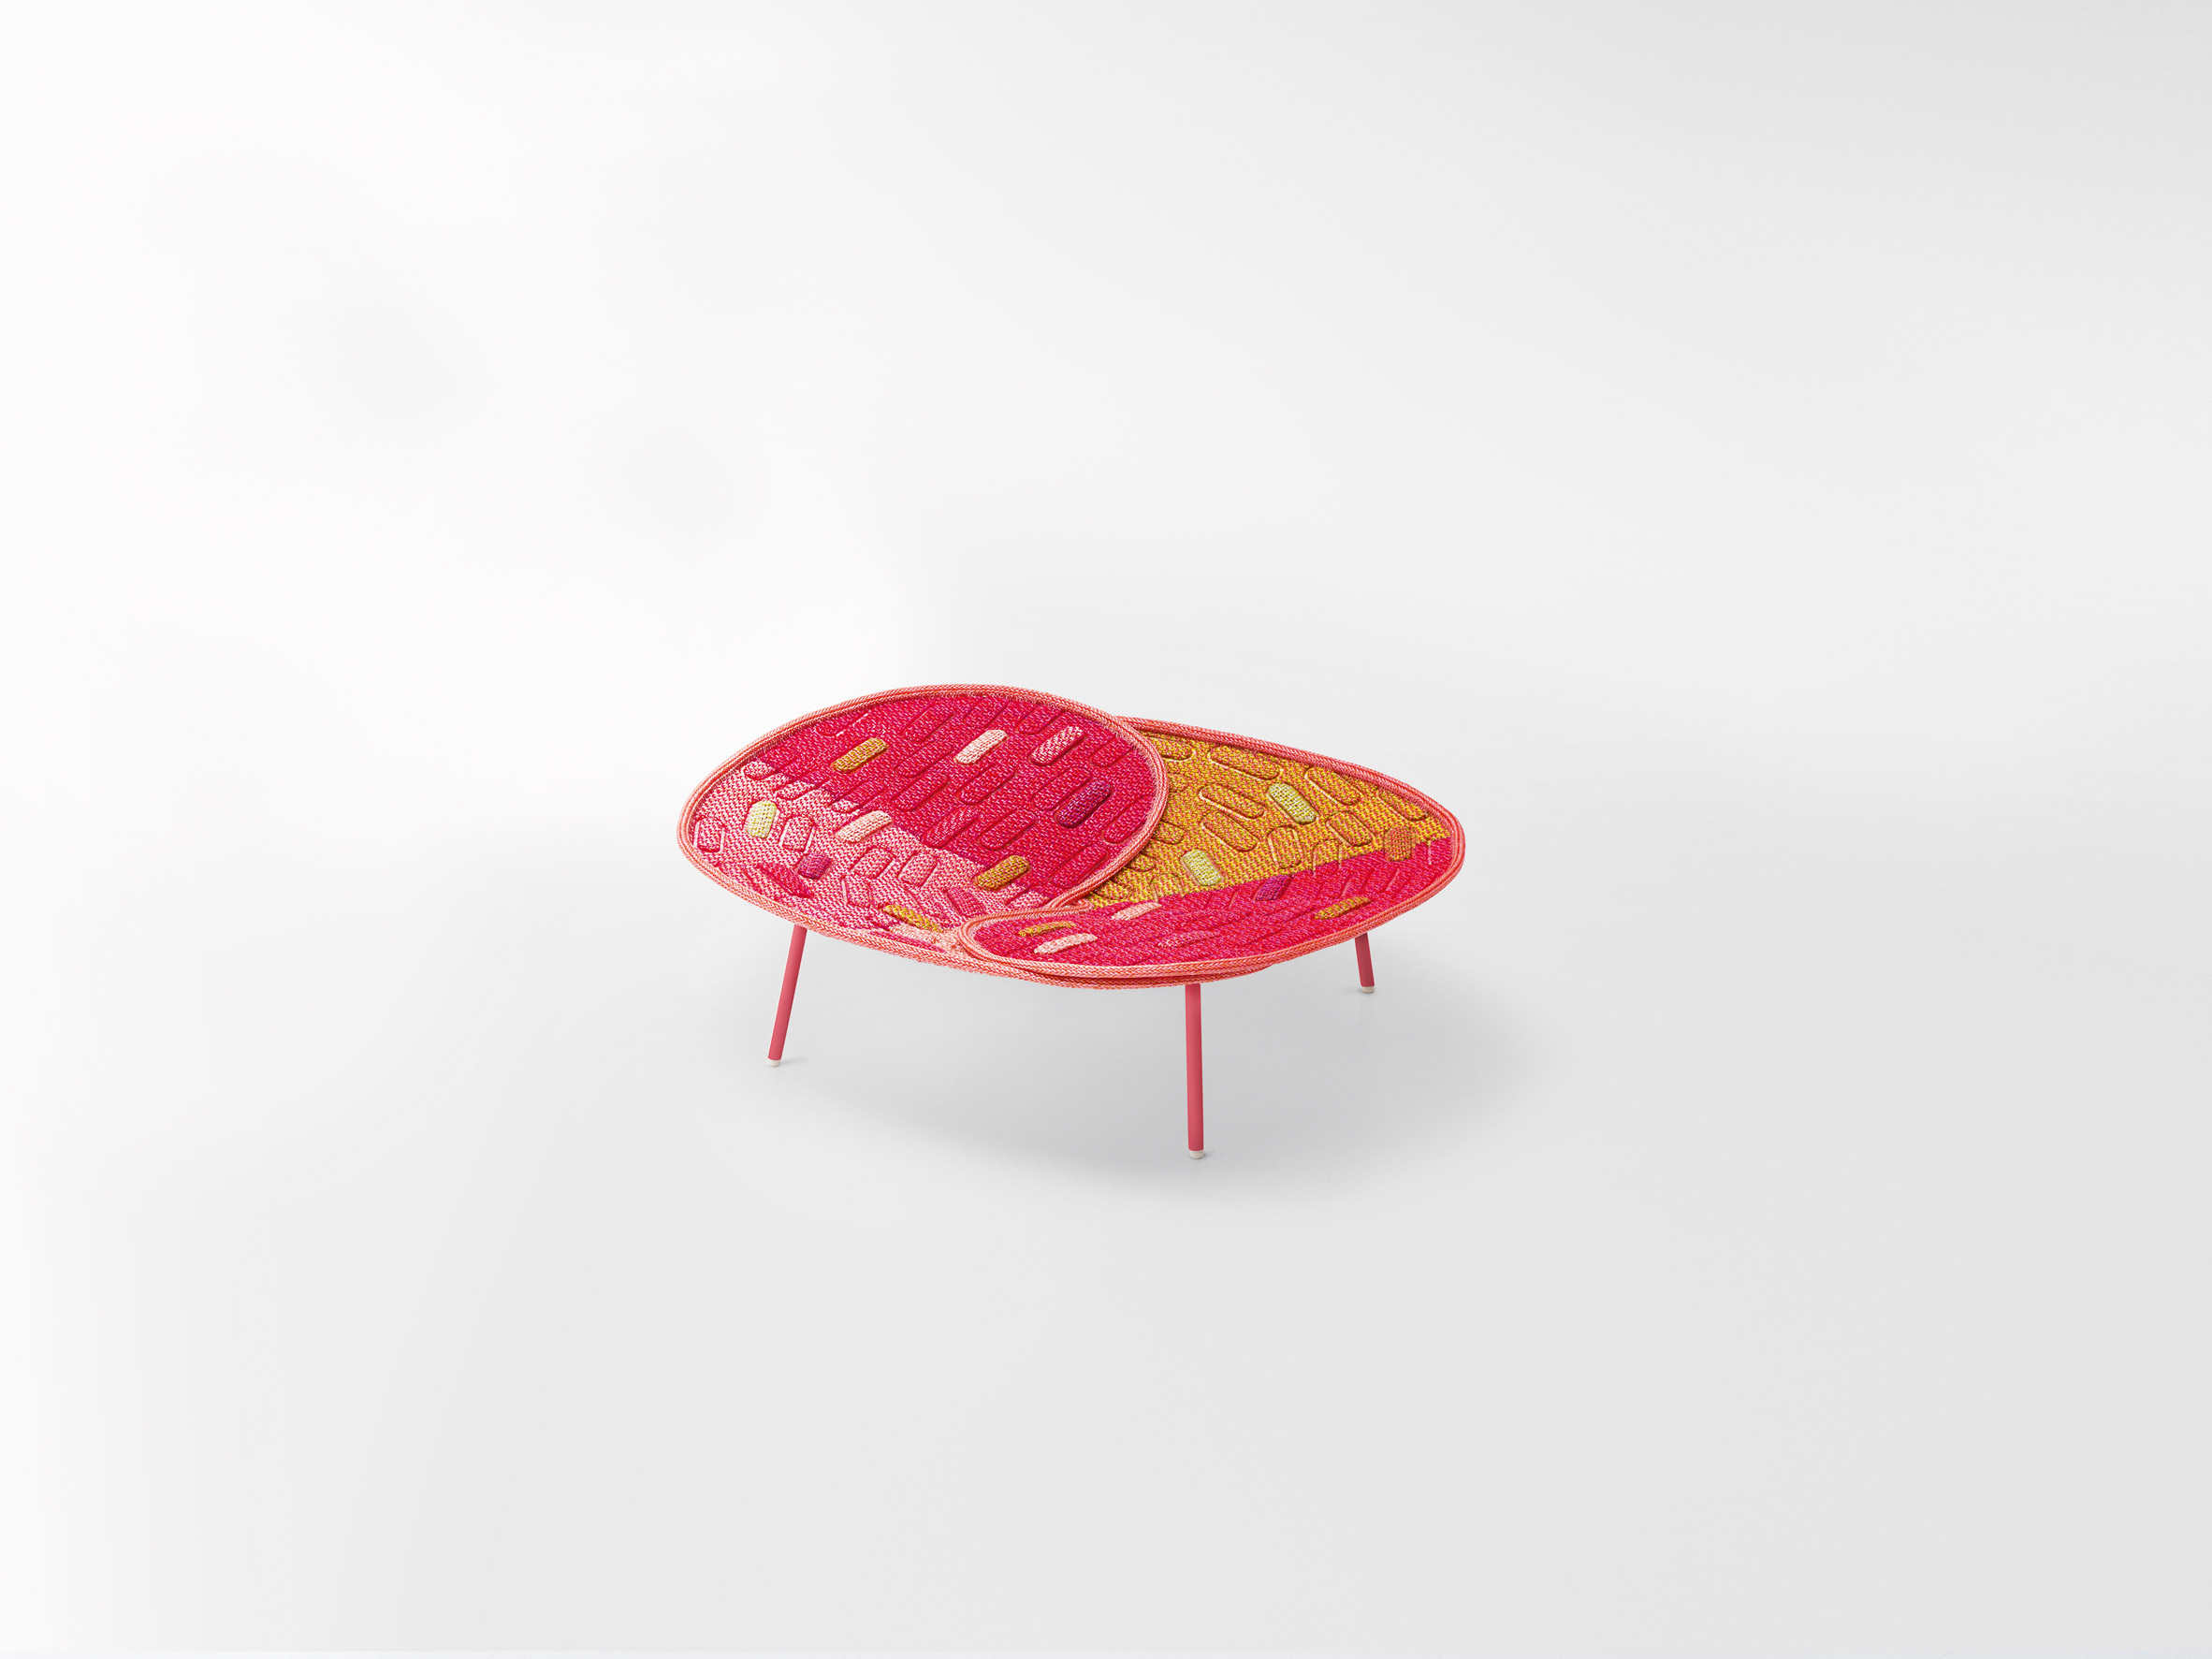 Red seat by Nendo for Paola Lenti's Hana-arashi collection